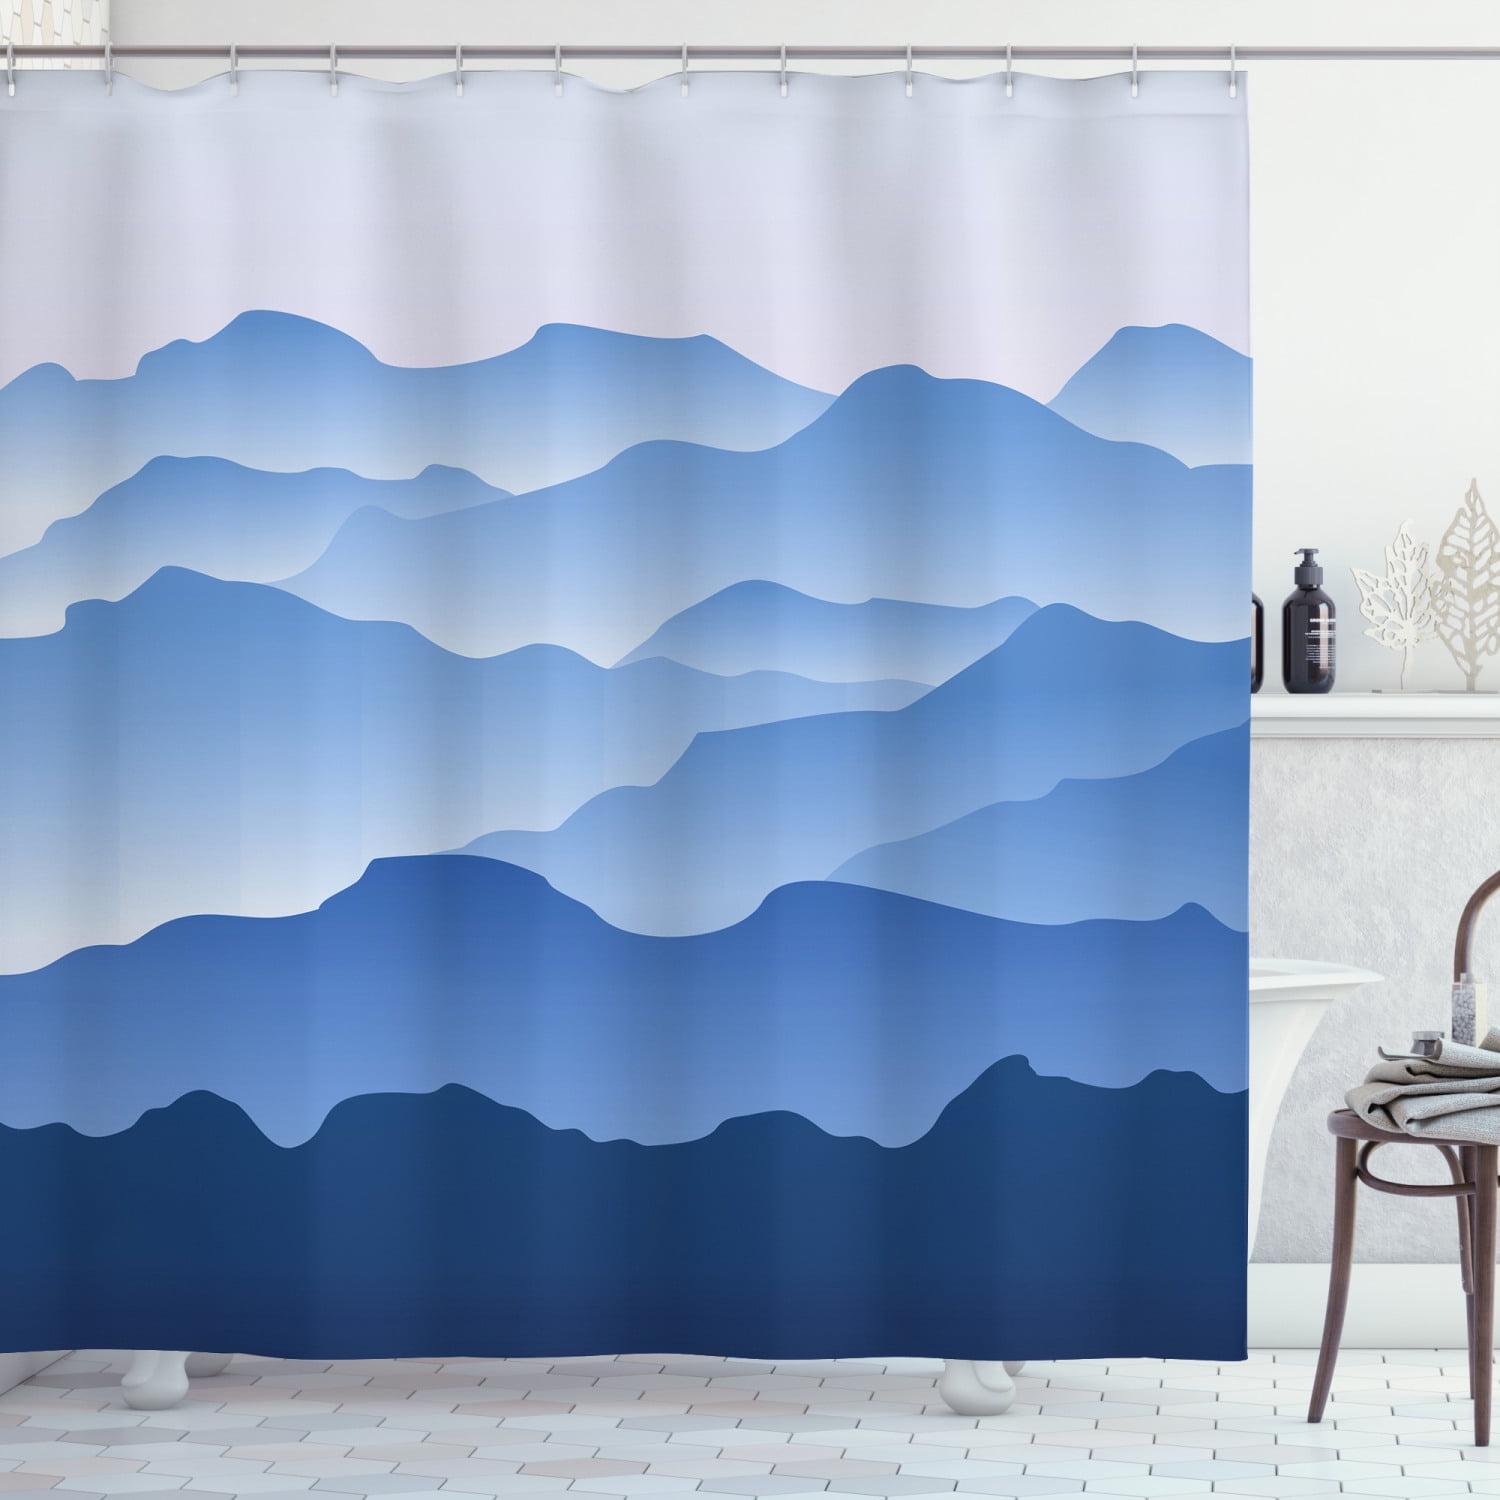 Mountains Shower Curtain